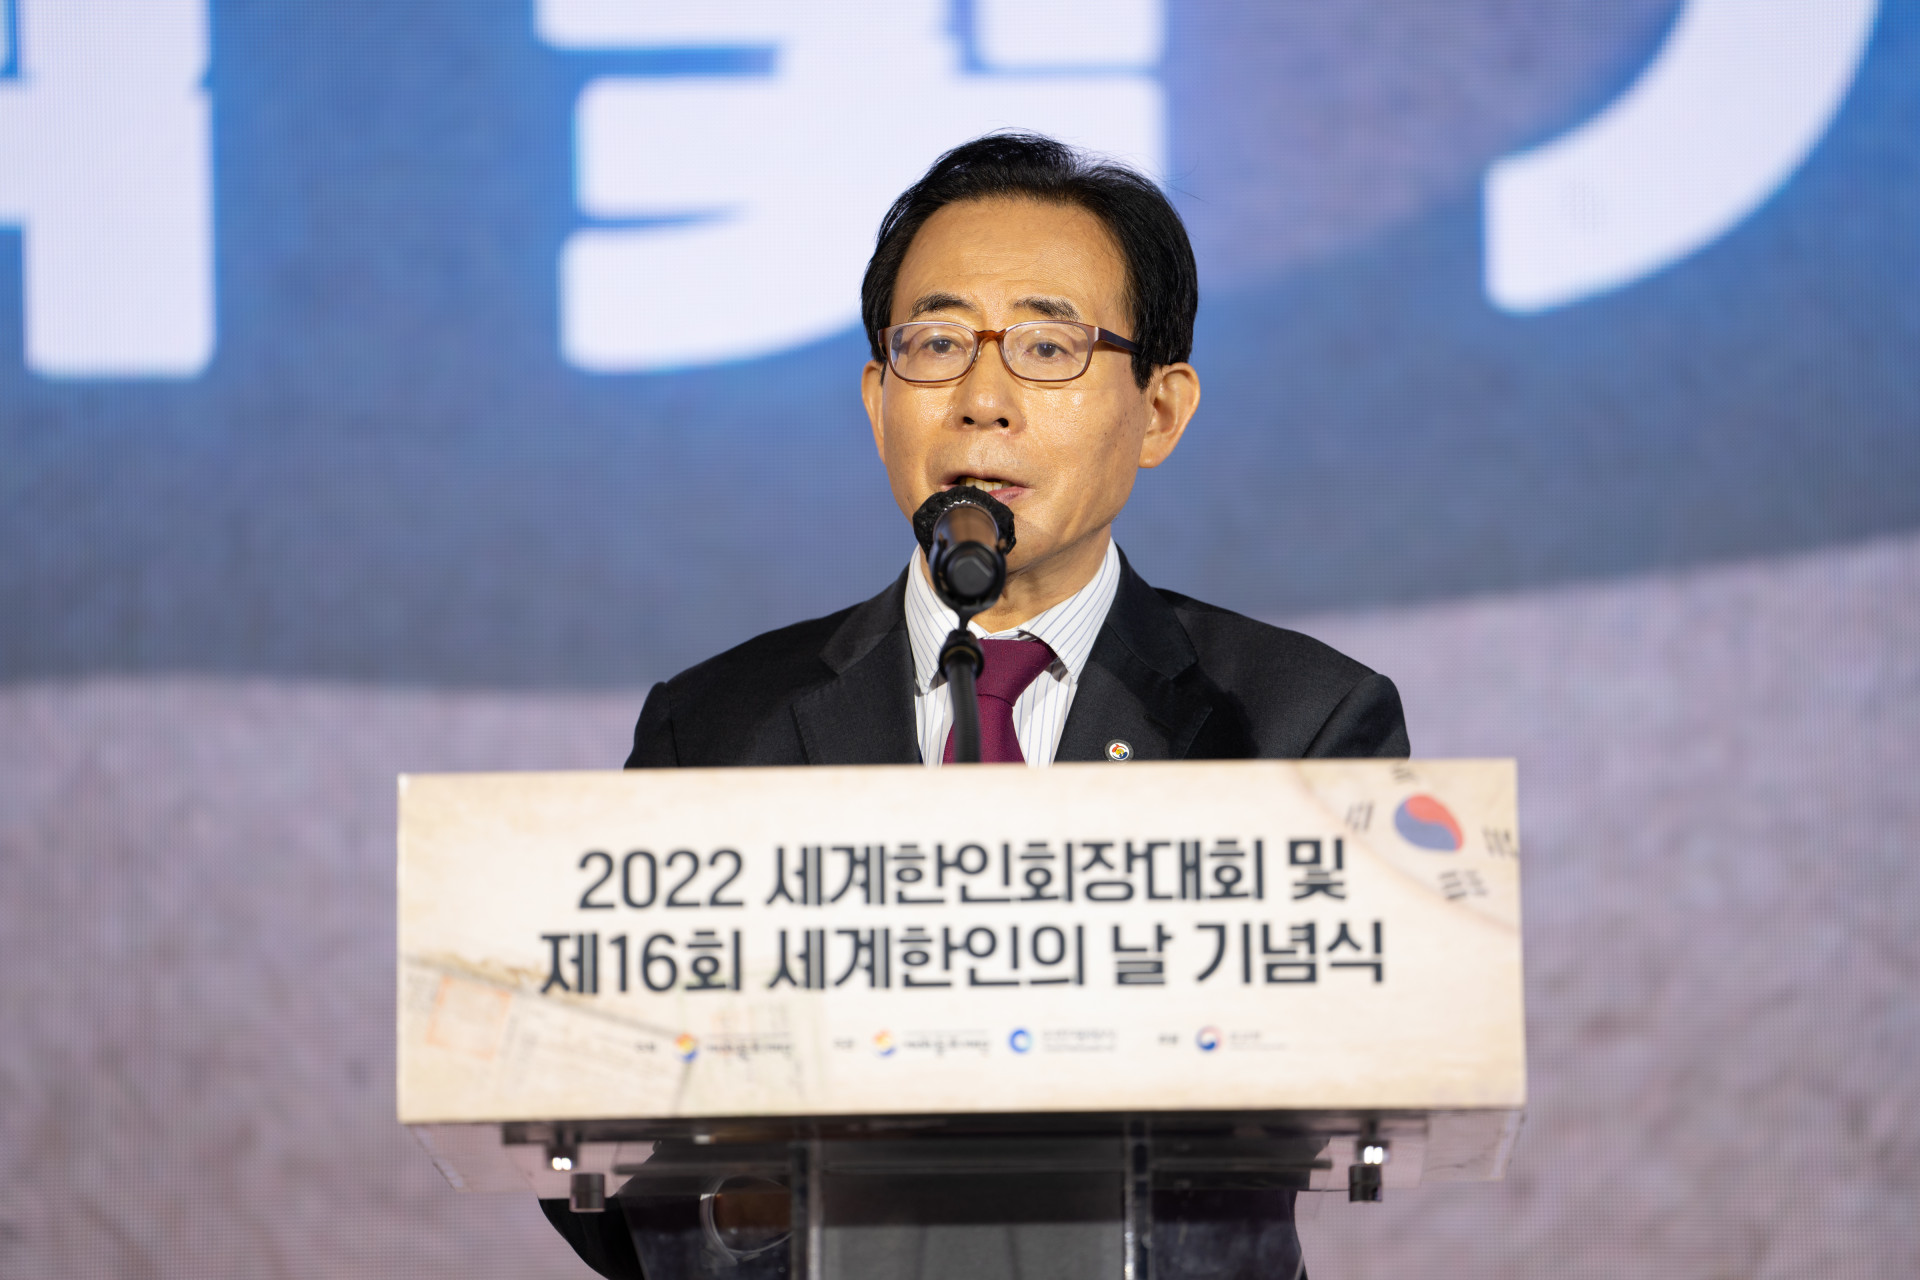 [Day 2] OKF Chairman Kim Sung-kon making his welcoming speech at the opening ceremony